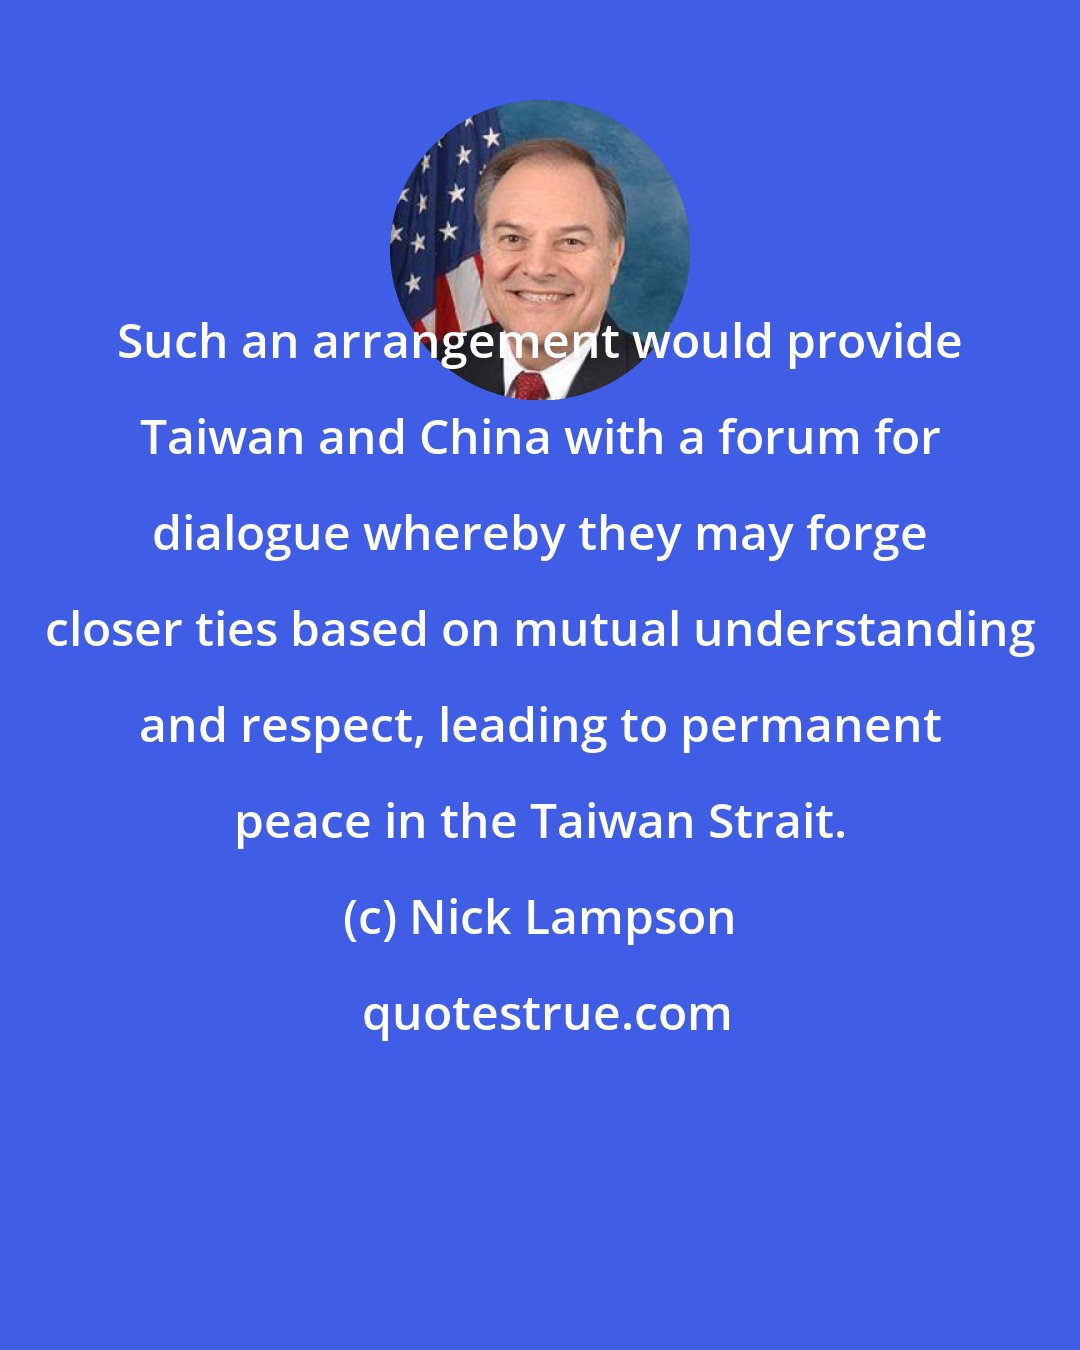 Nick Lampson: Such an arrangement would provide Taiwan and China with a forum for dialogue whereby they may forge closer ties based on mutual understanding and respect, leading to permanent peace in the Taiwan Strait.